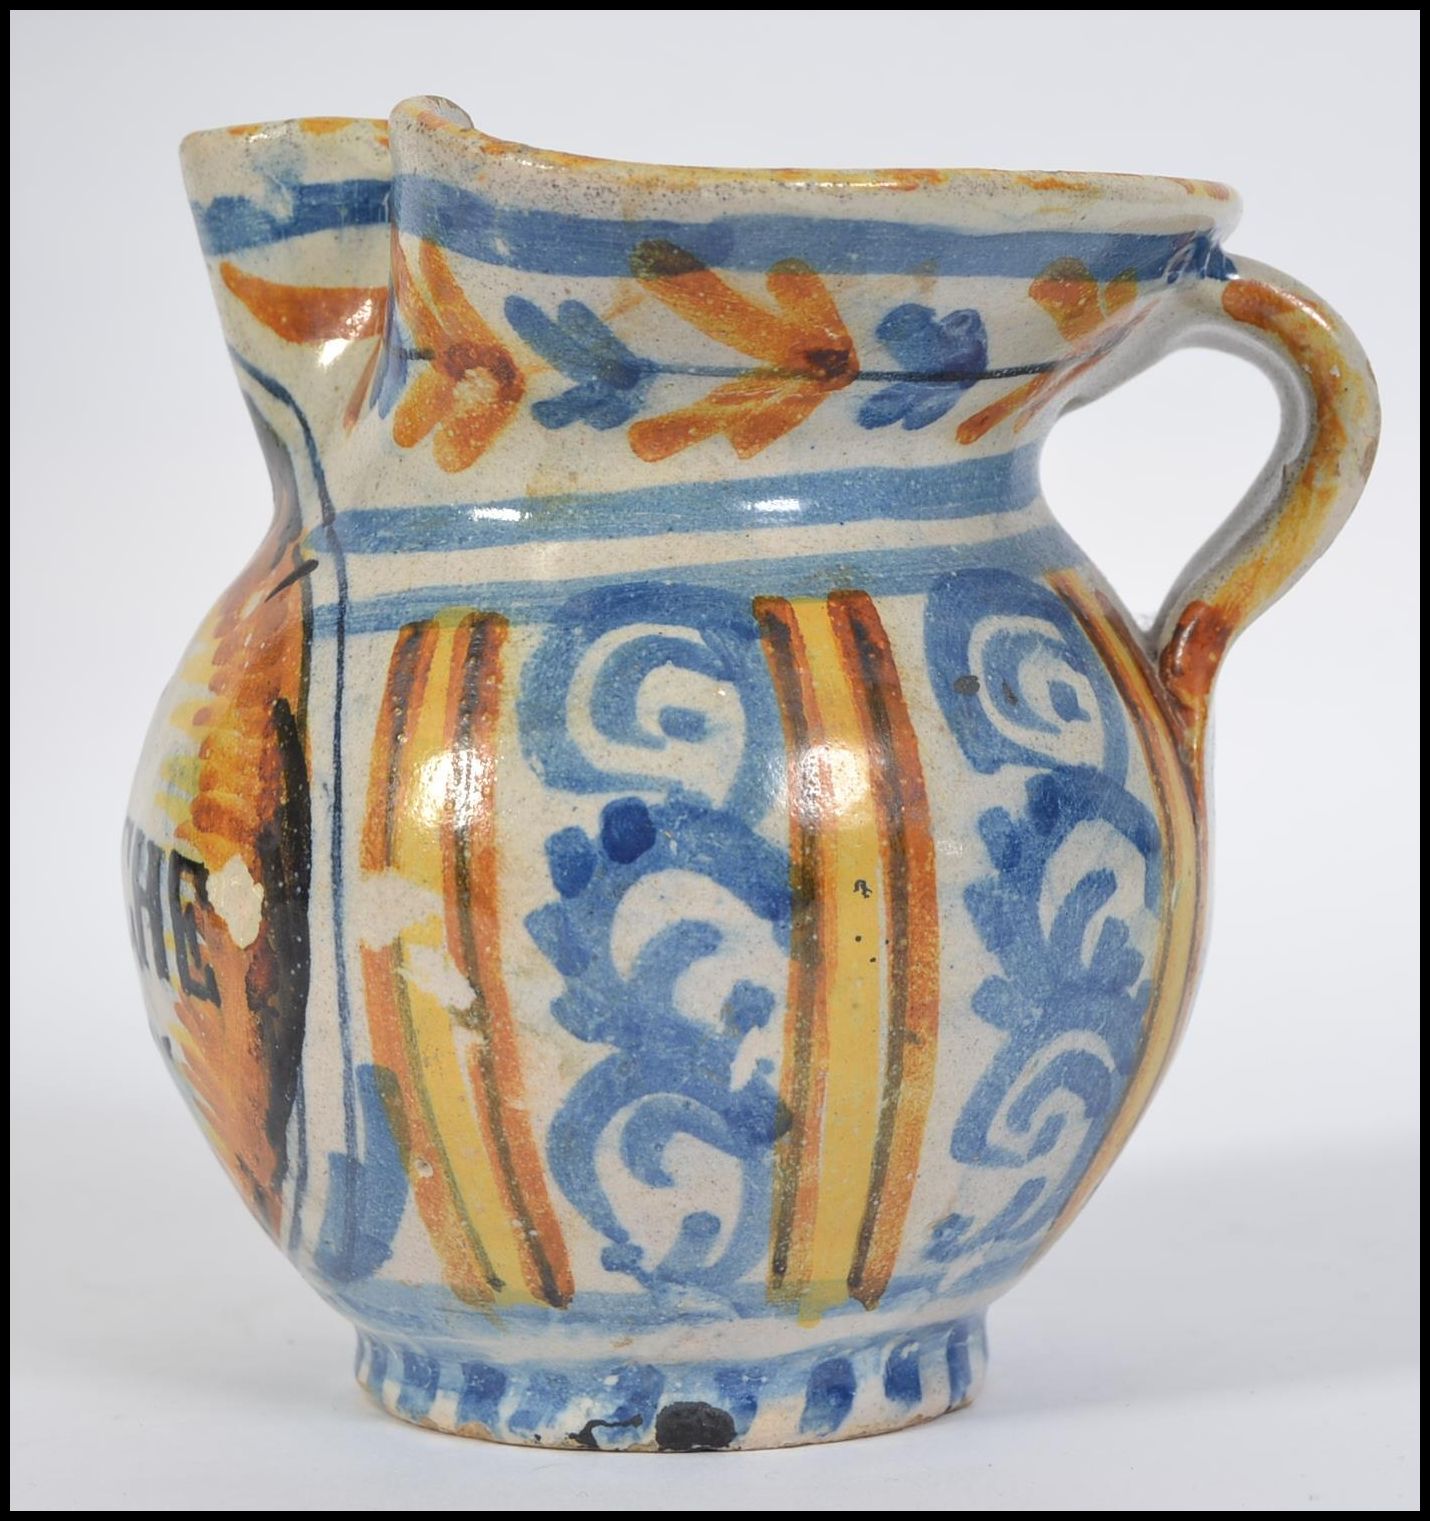 A Small 19th Century Faience possible Apothecary Jug inscribed V G BRVGGHE below the pinched spout - Image 2 of 6